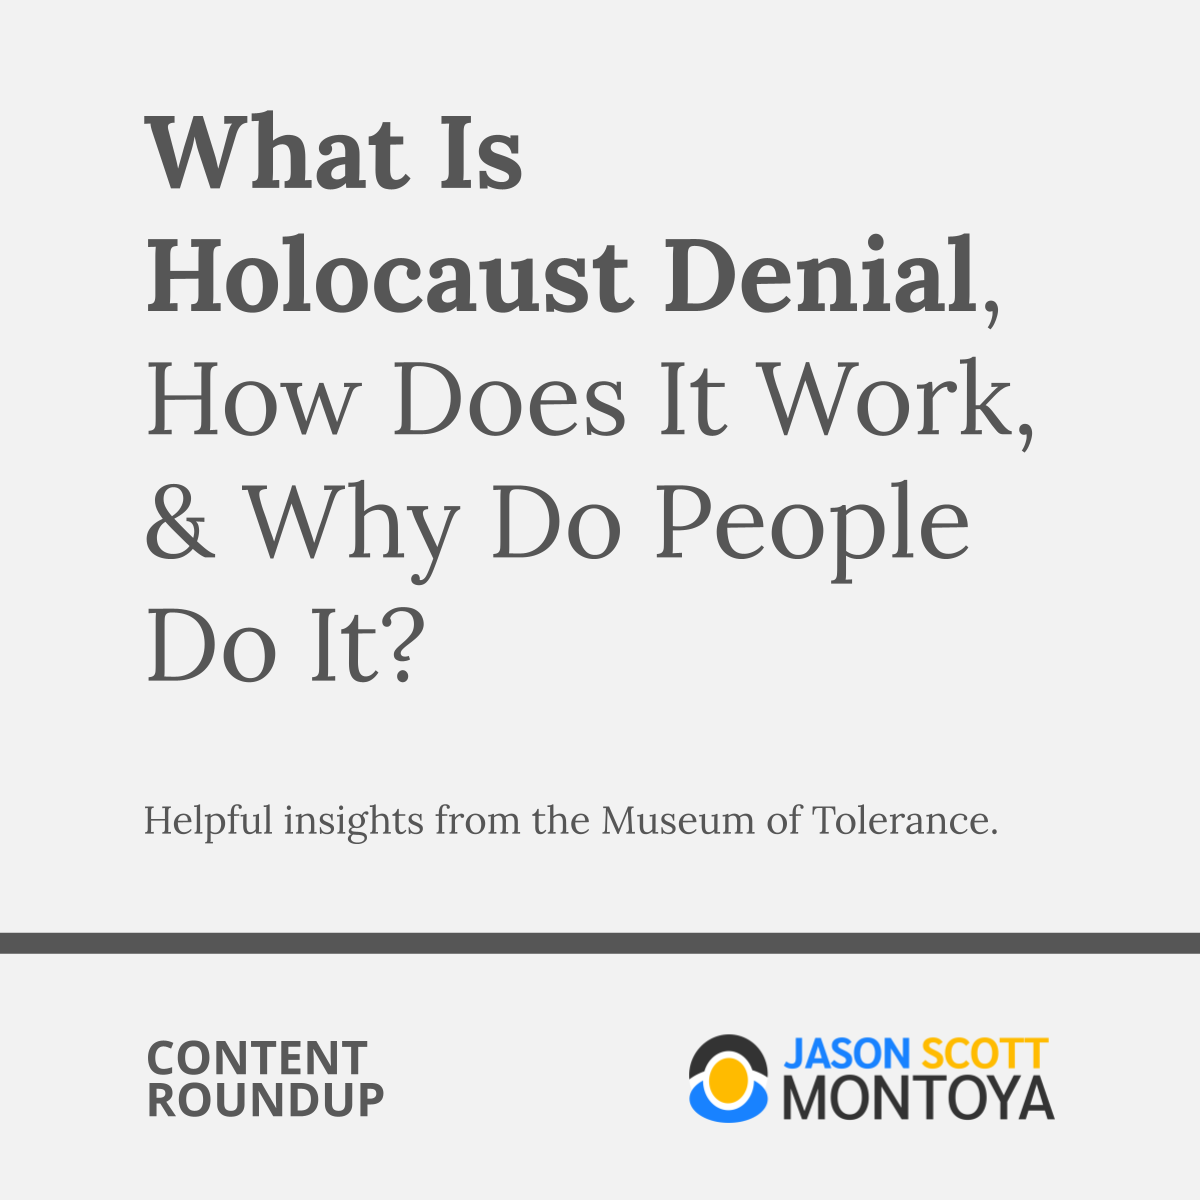 What Is Holocaust Denial, How Does It Work, & Why Do People Do It?  Helpful insights from the Museum of Tolerance.